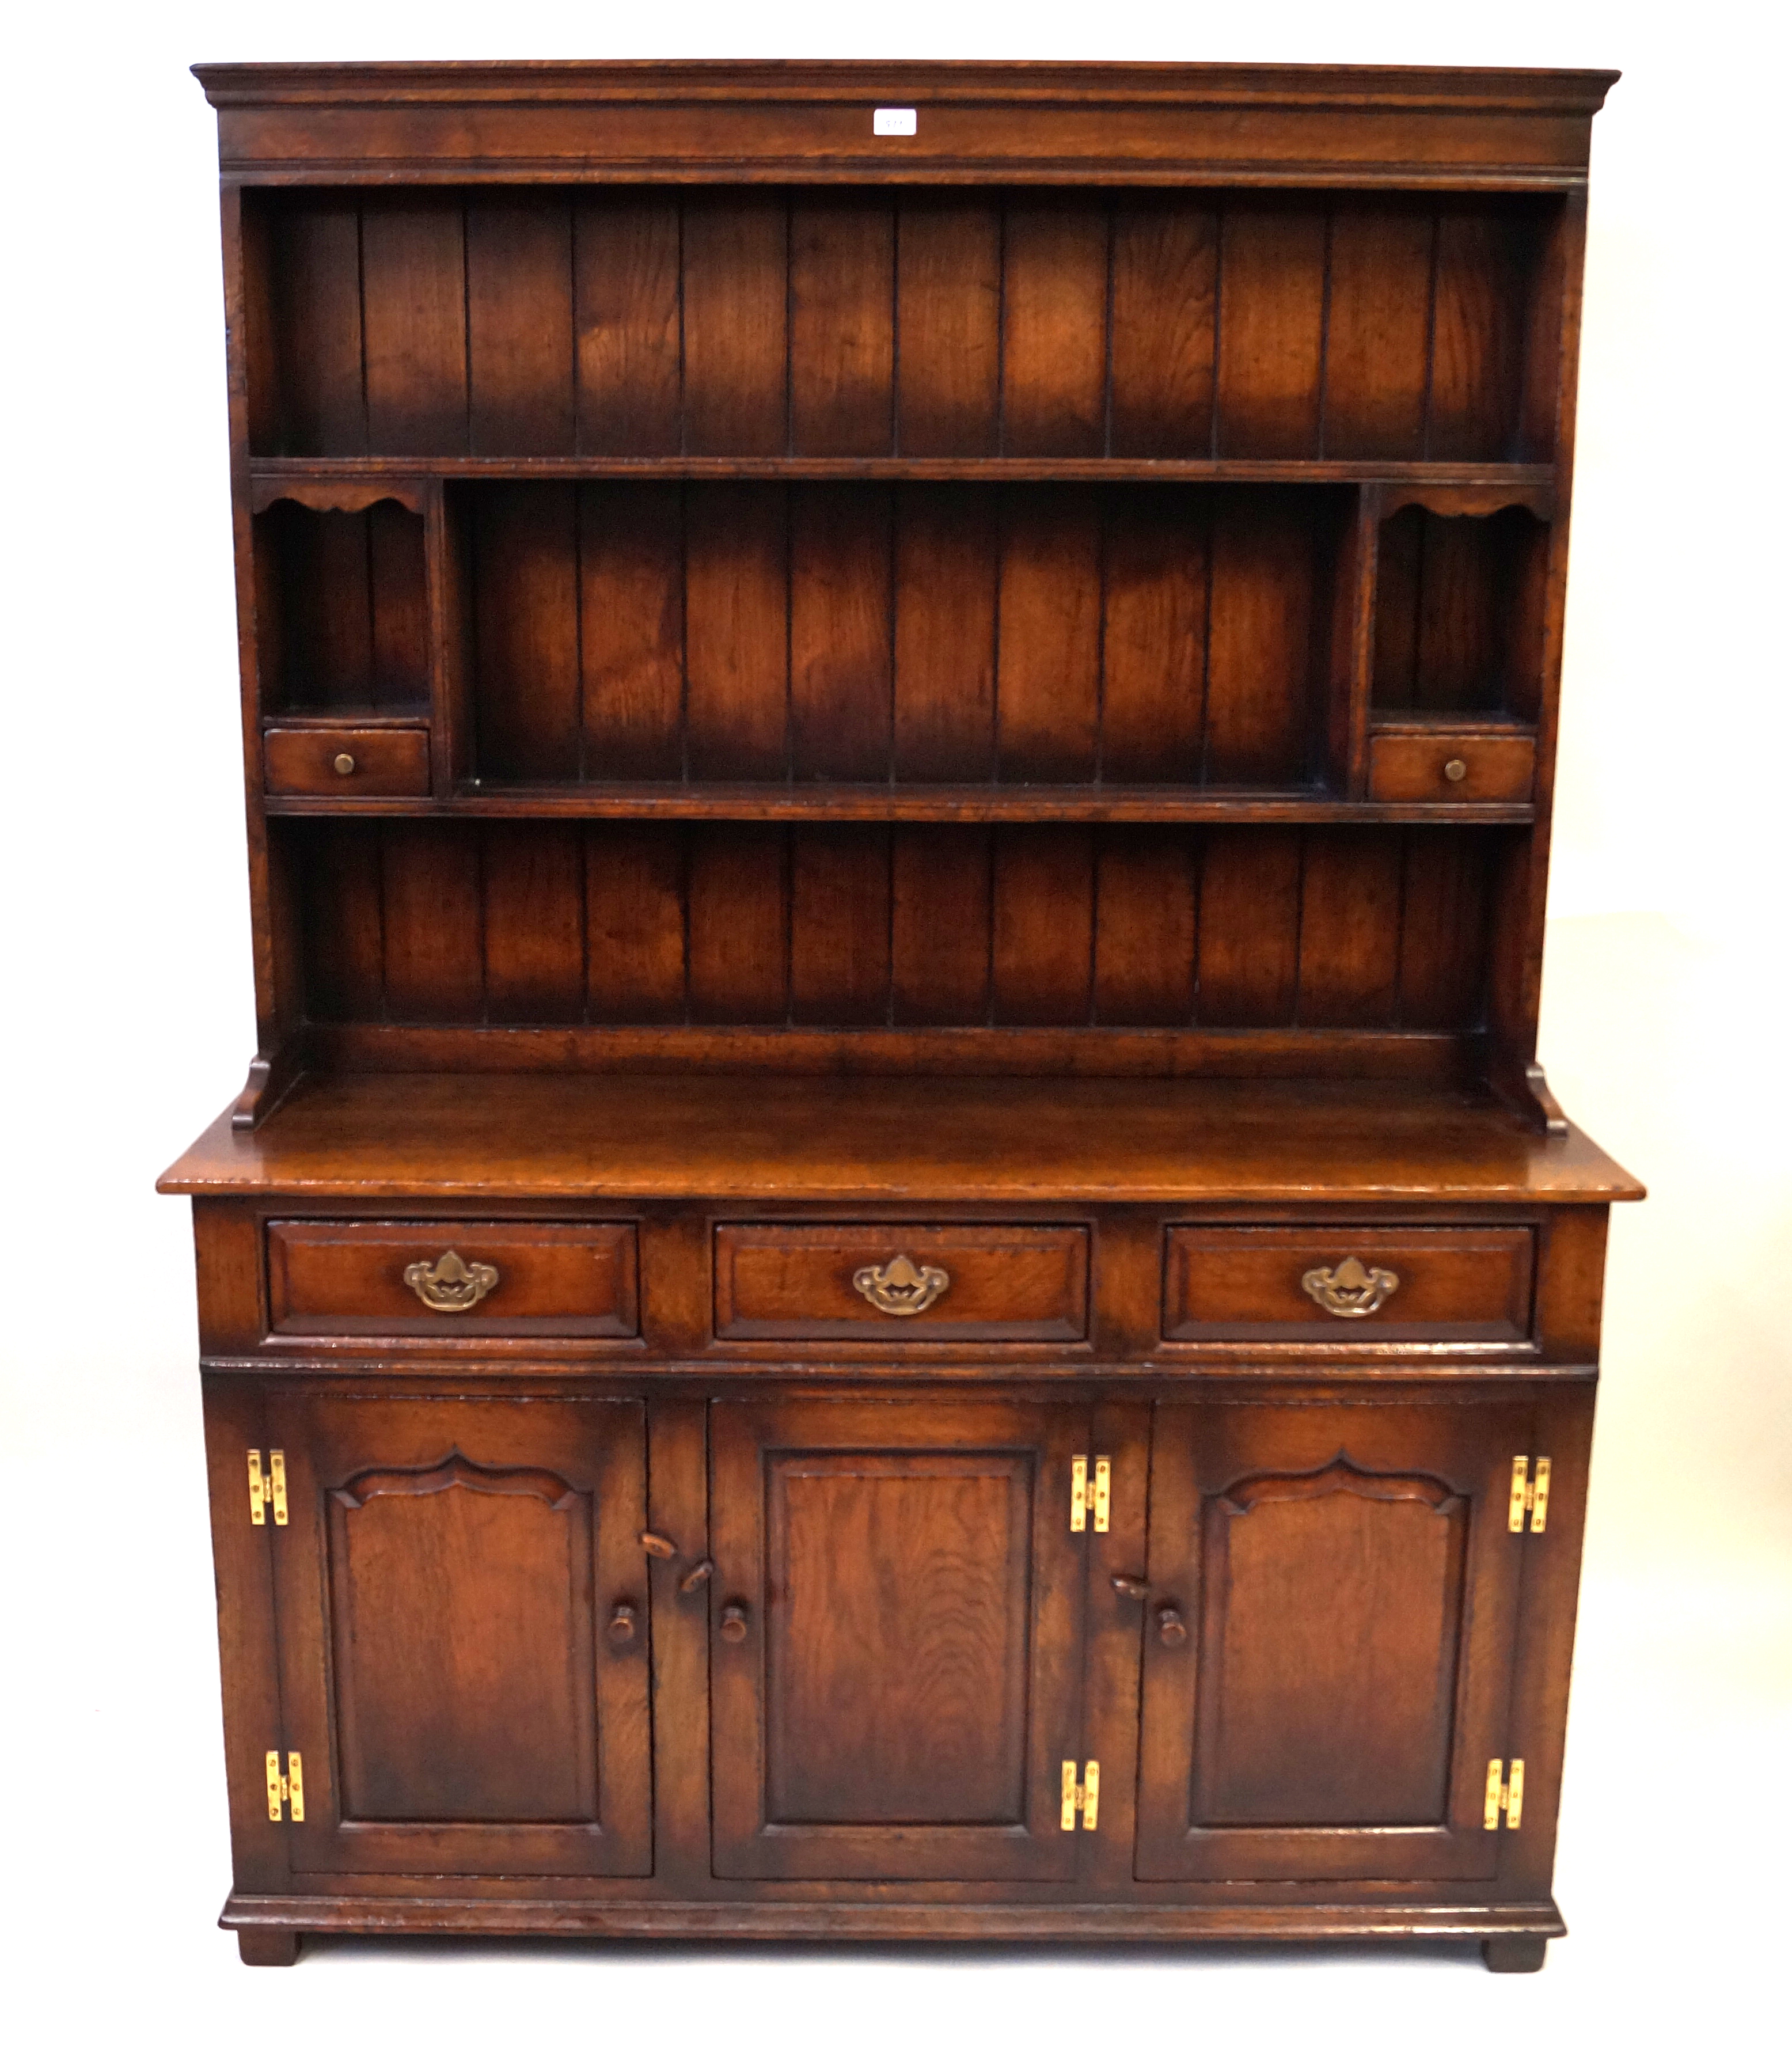 A good quality period style solid oak high back dresser in the style of Titchmarsh & Goodwin,